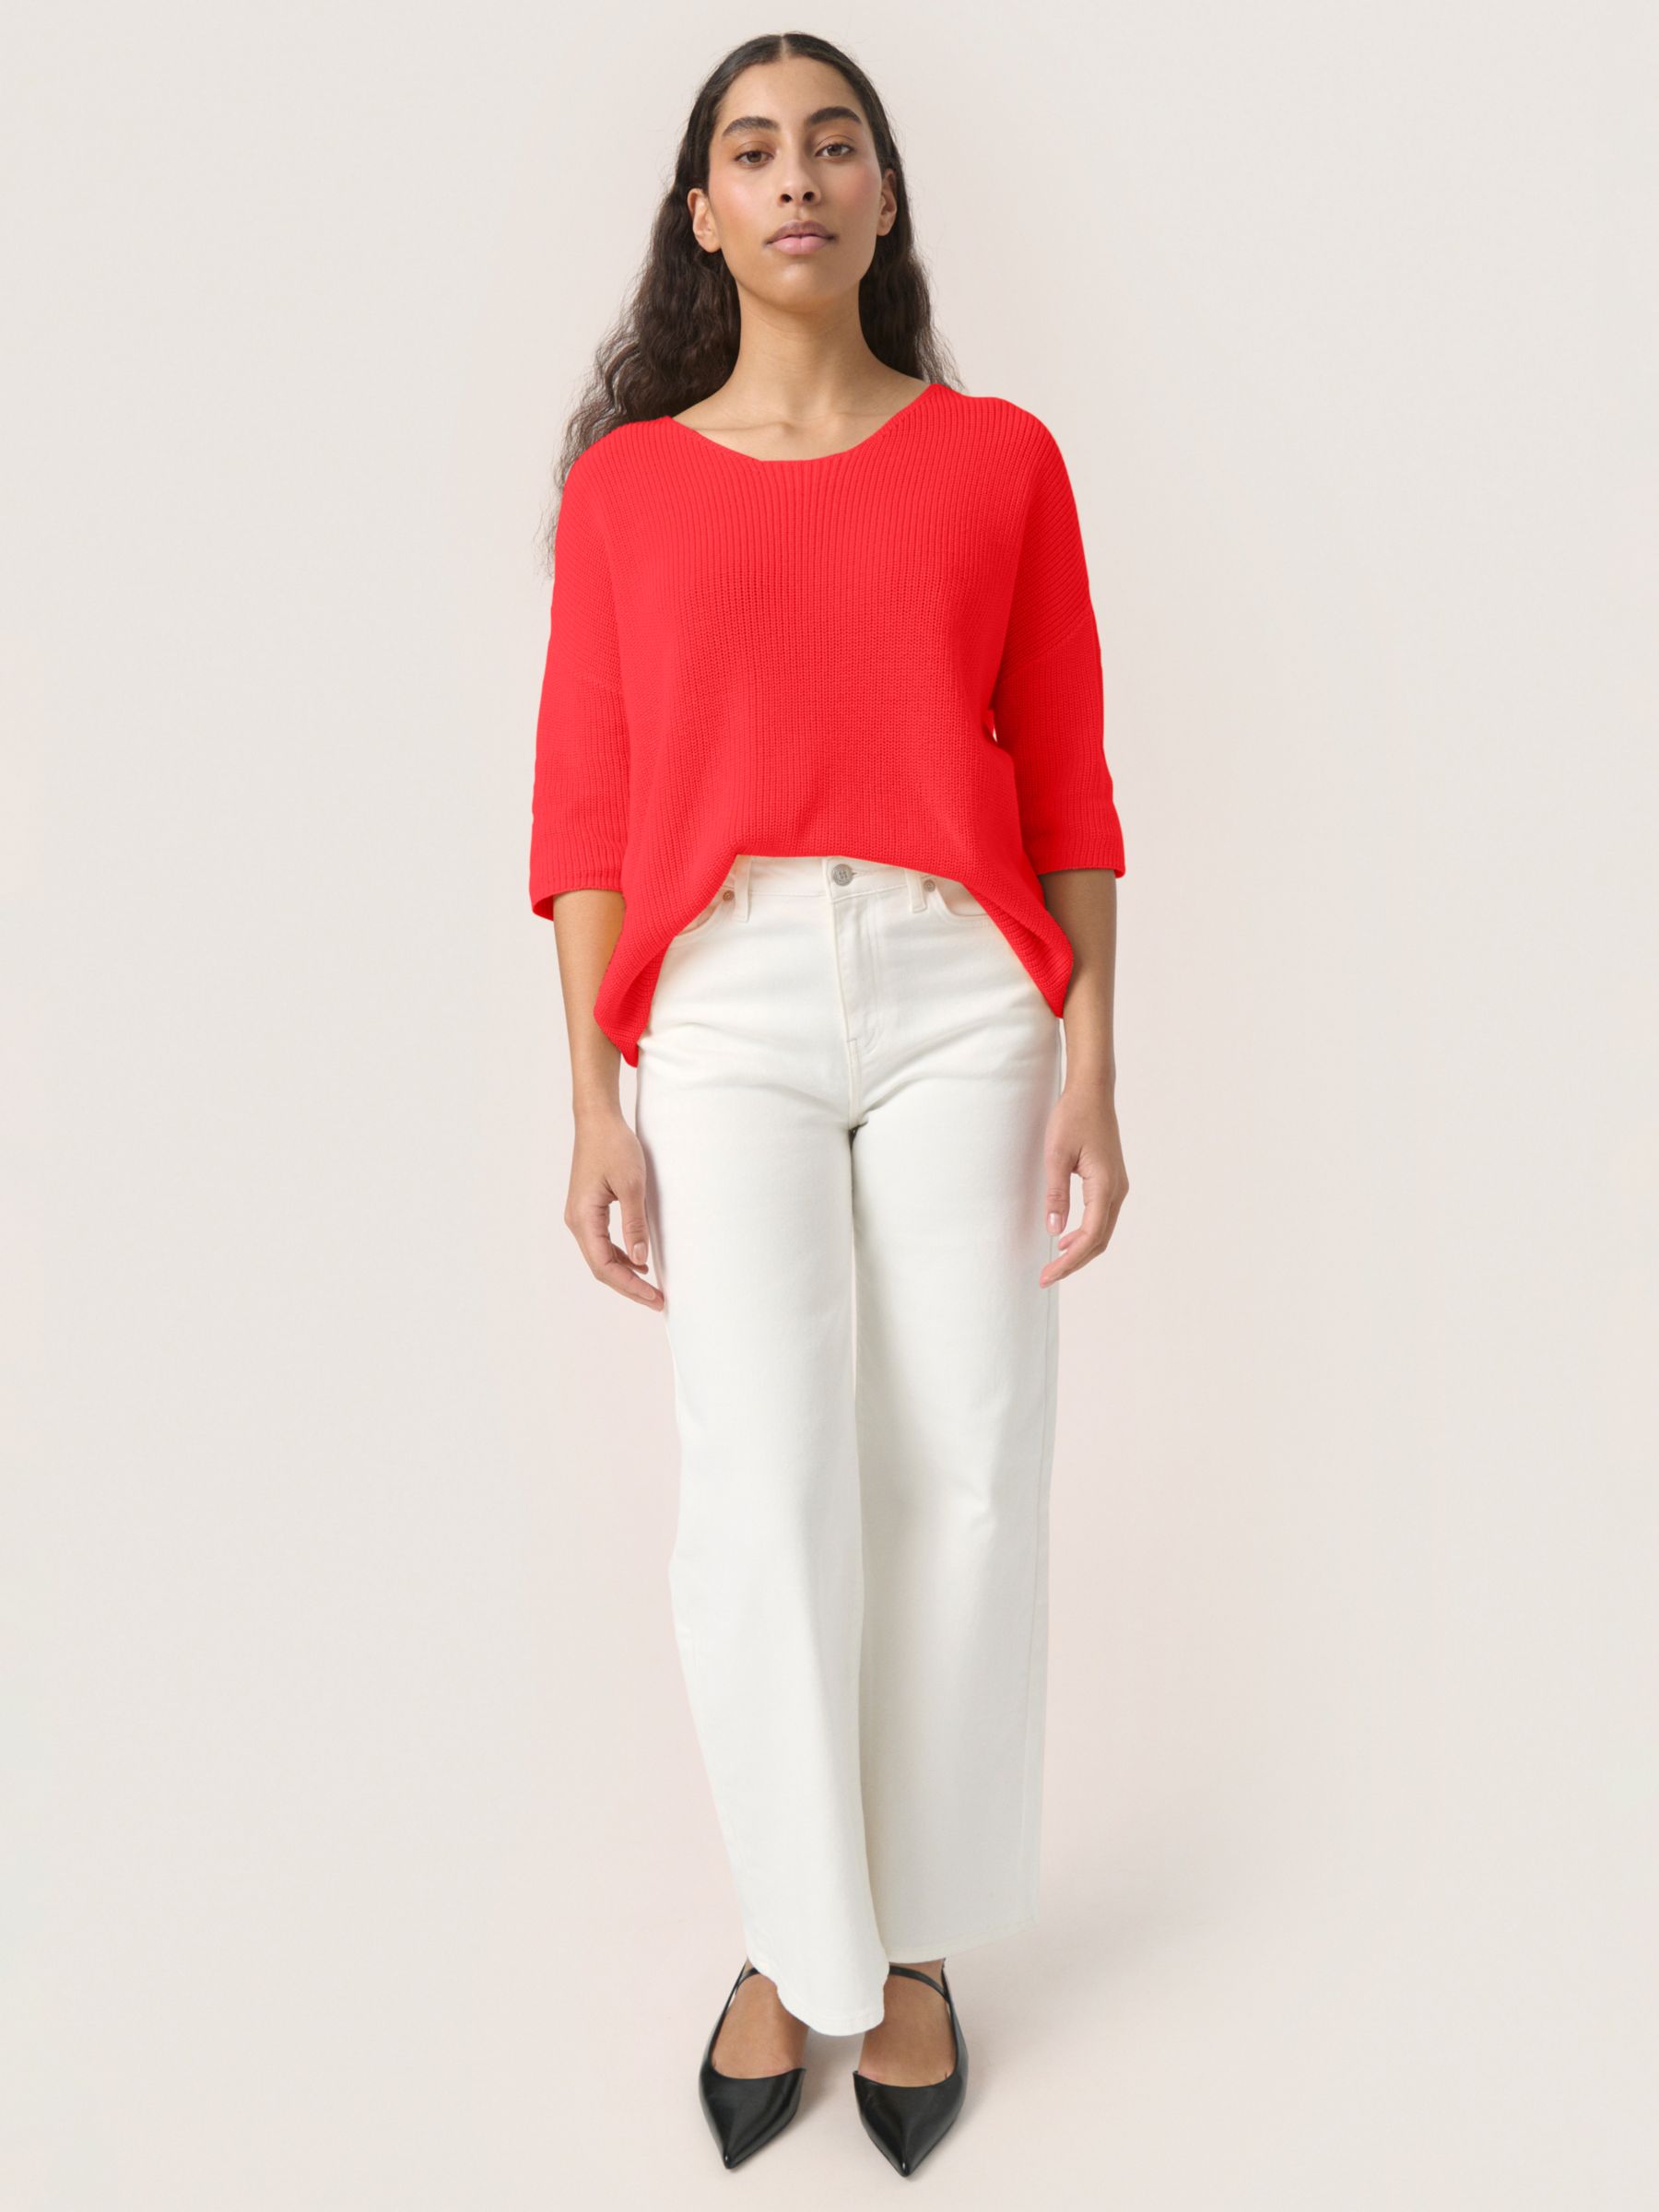 Soaked In Luxury Tuesday Cotton Blend Half Sleeve Jumper, Hot Coral, XS